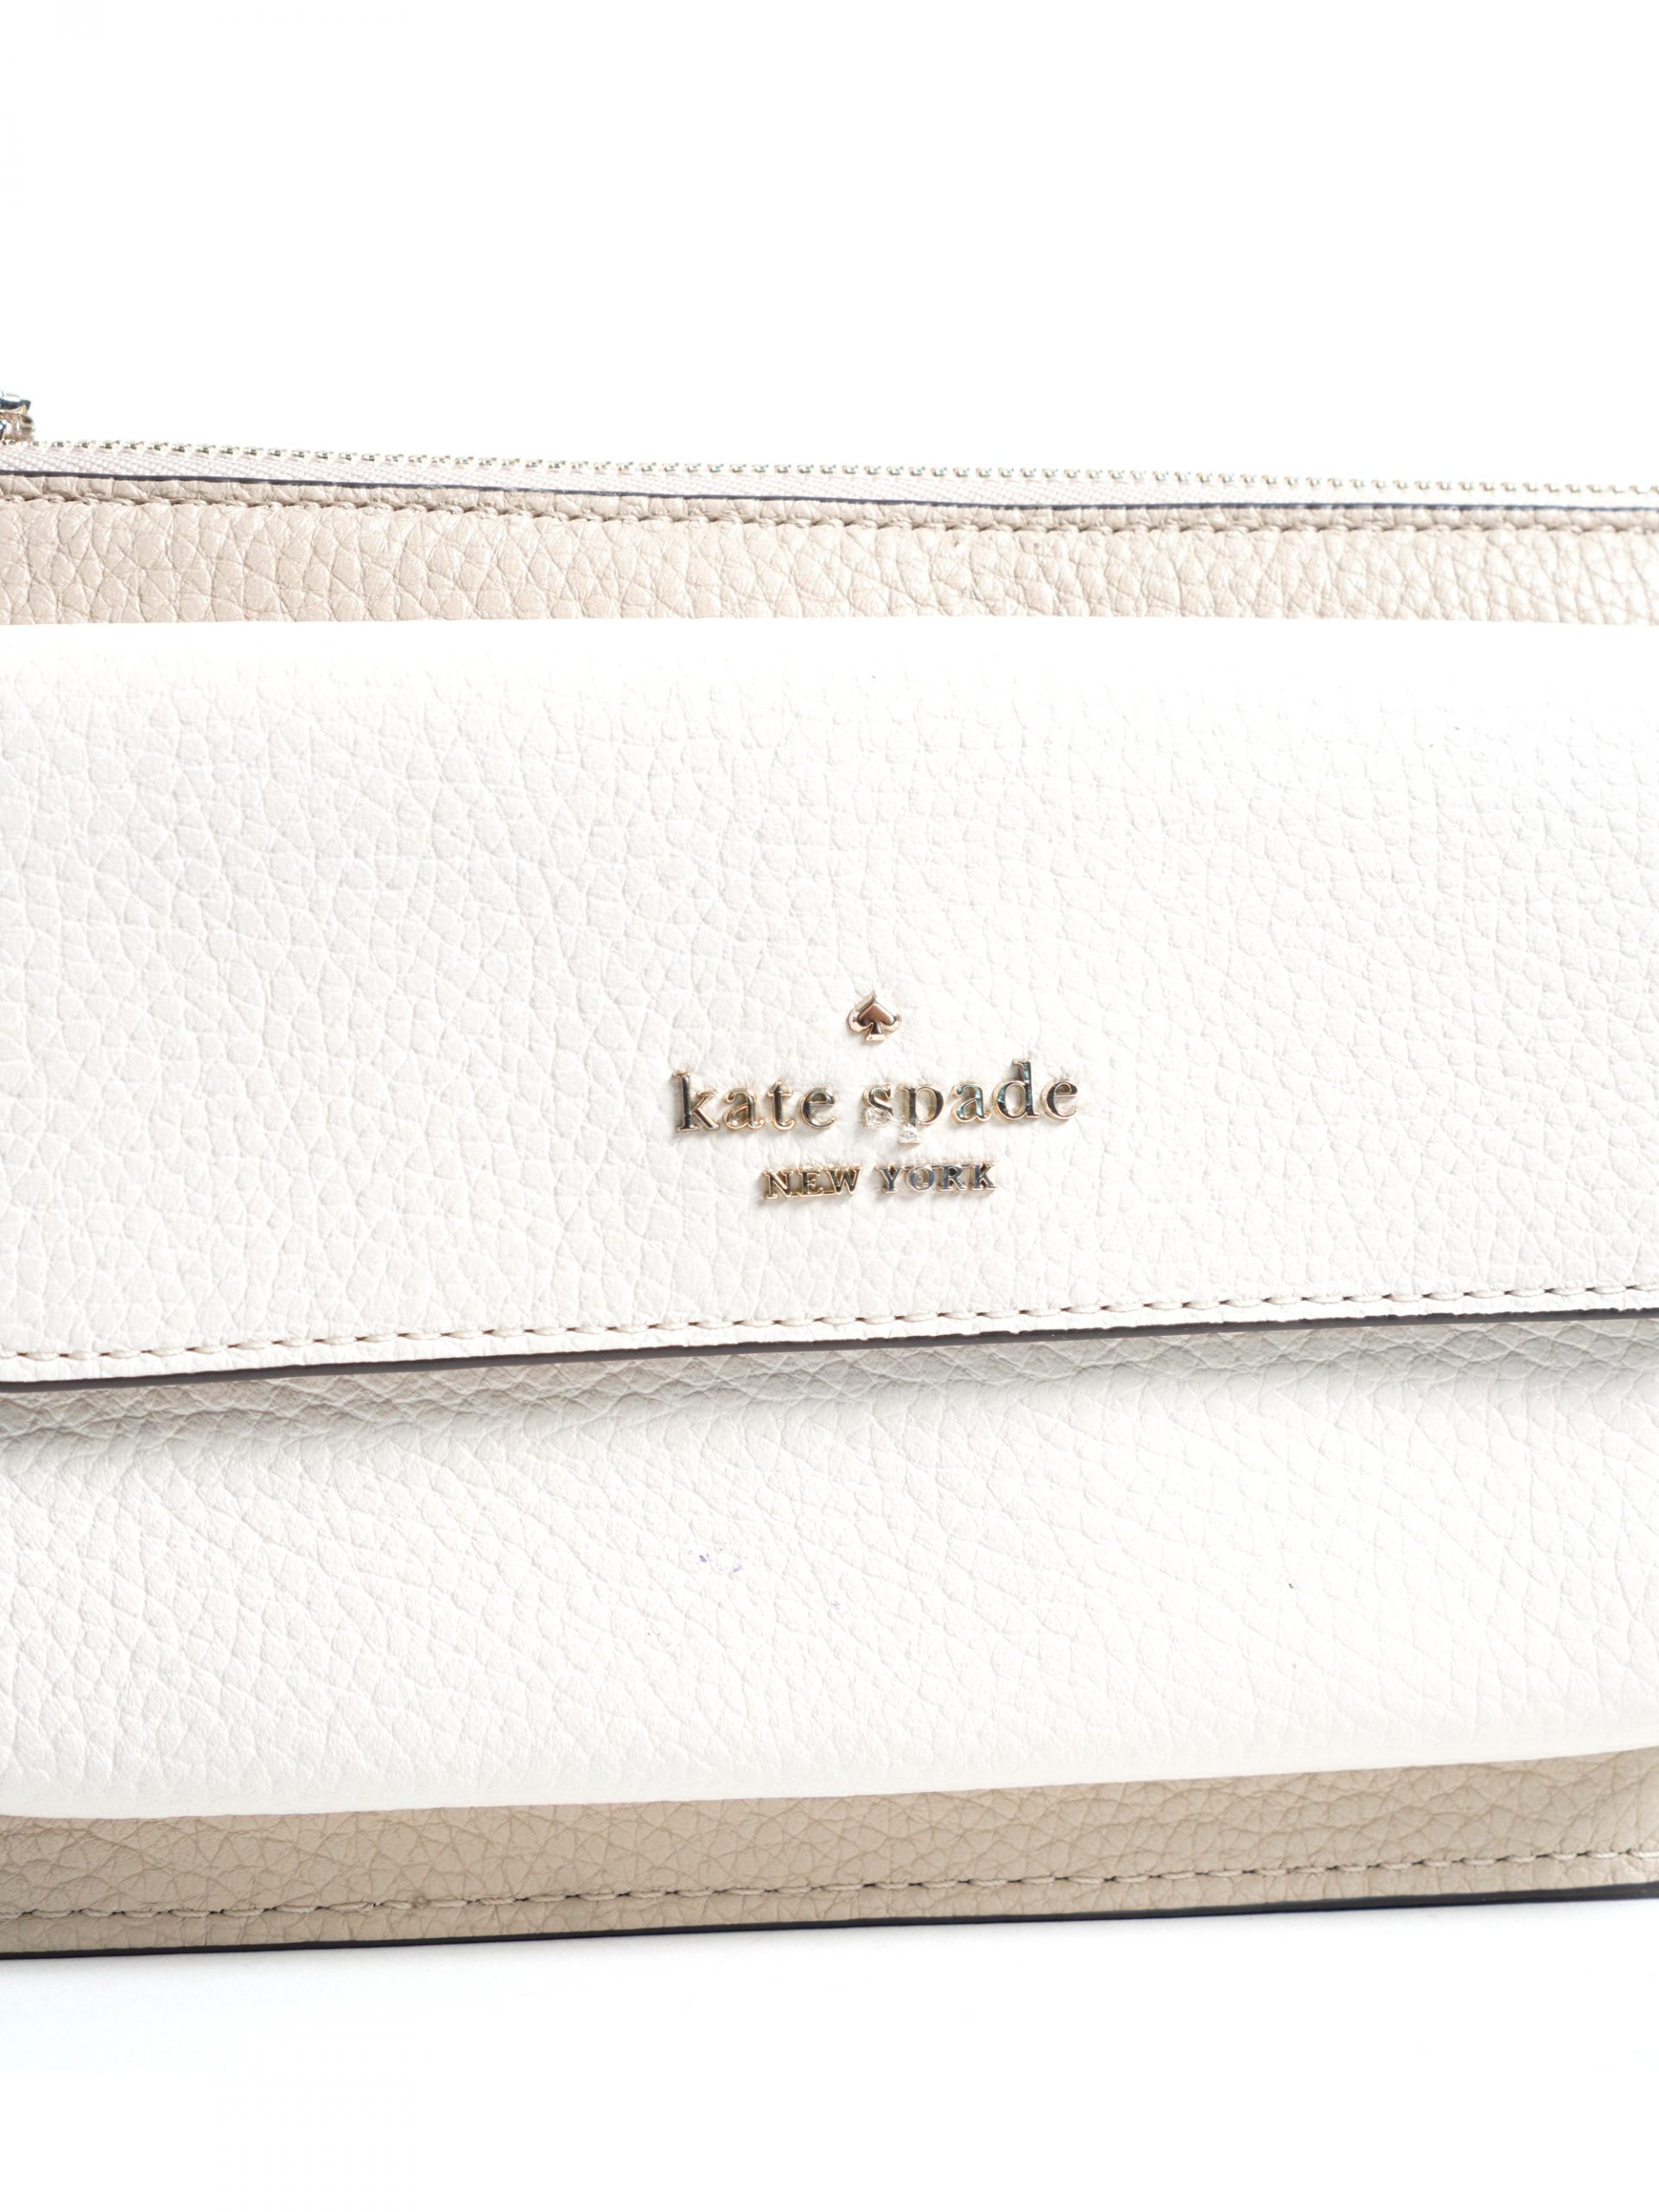  Kate Spade K9398 Leila Flap Backpack with Faux Shearling in  Light Sand